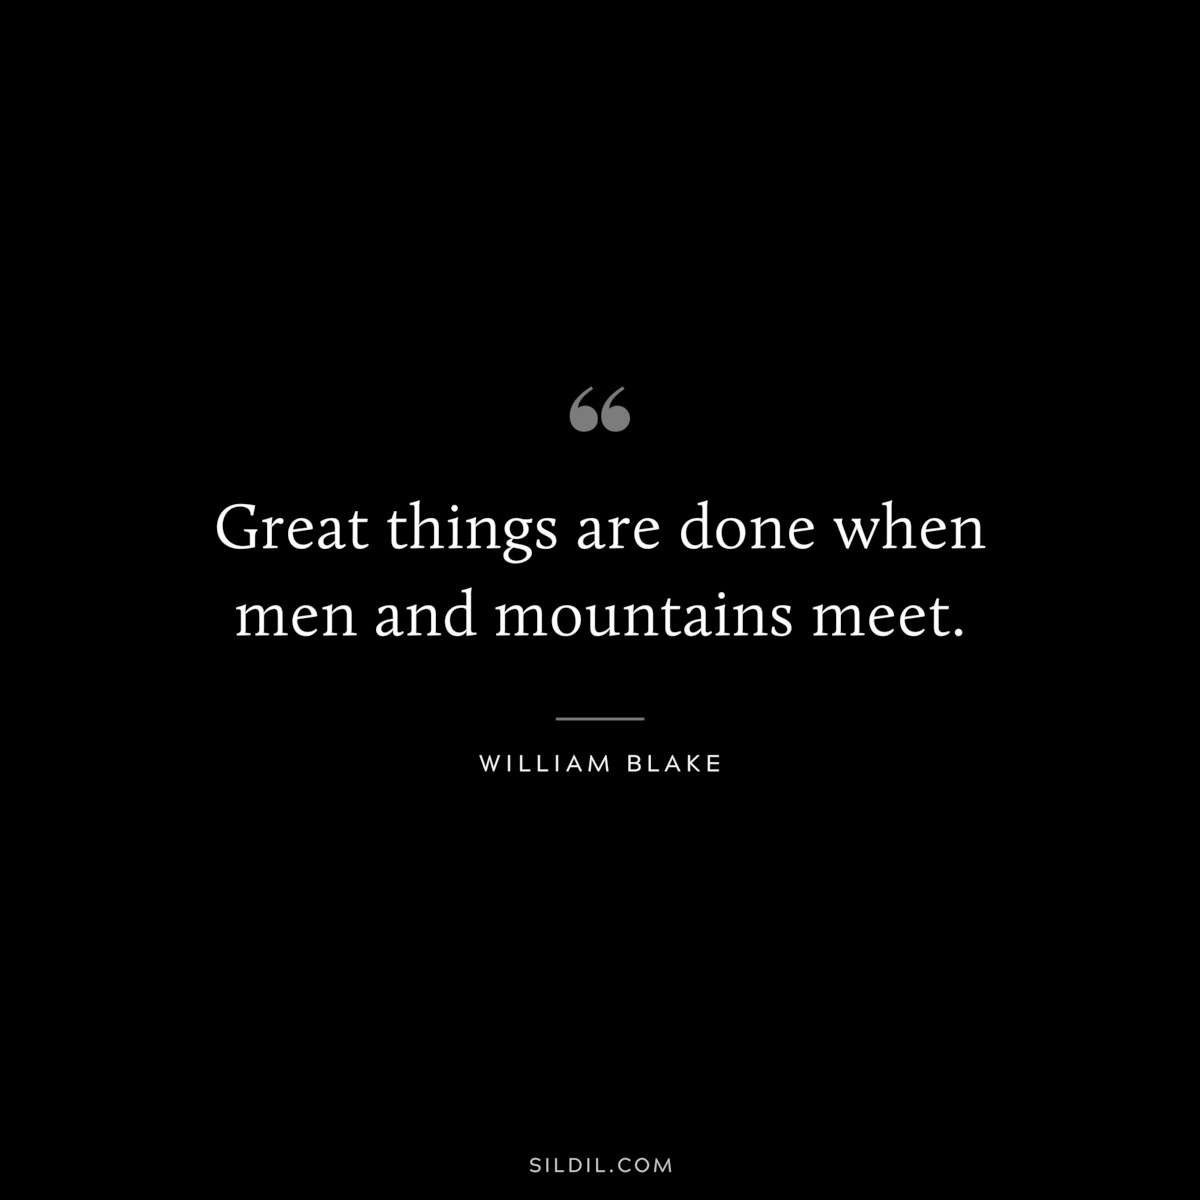 Great things are done when men and mountains meet. ― William Blake